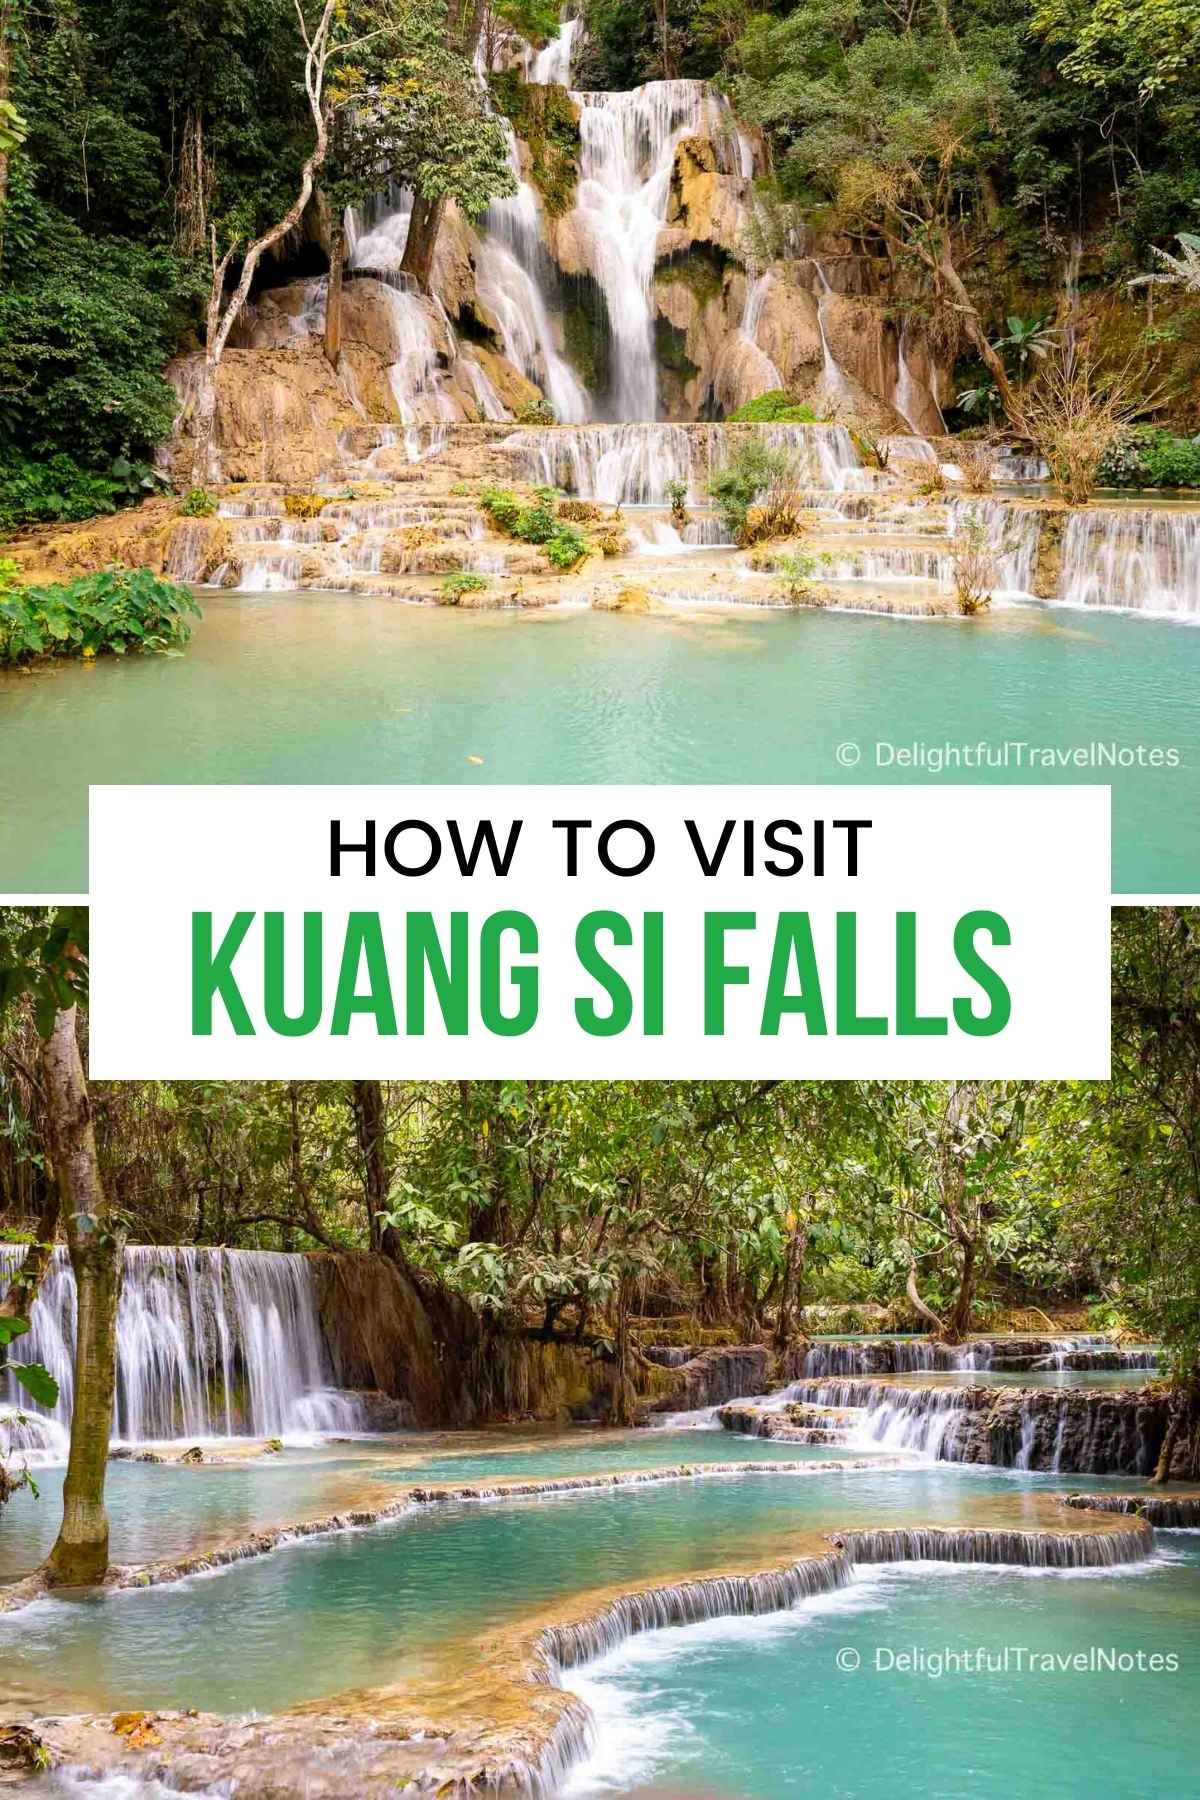 a Pinterest collage of scenery at Kuang Si Falls for this travel guide.